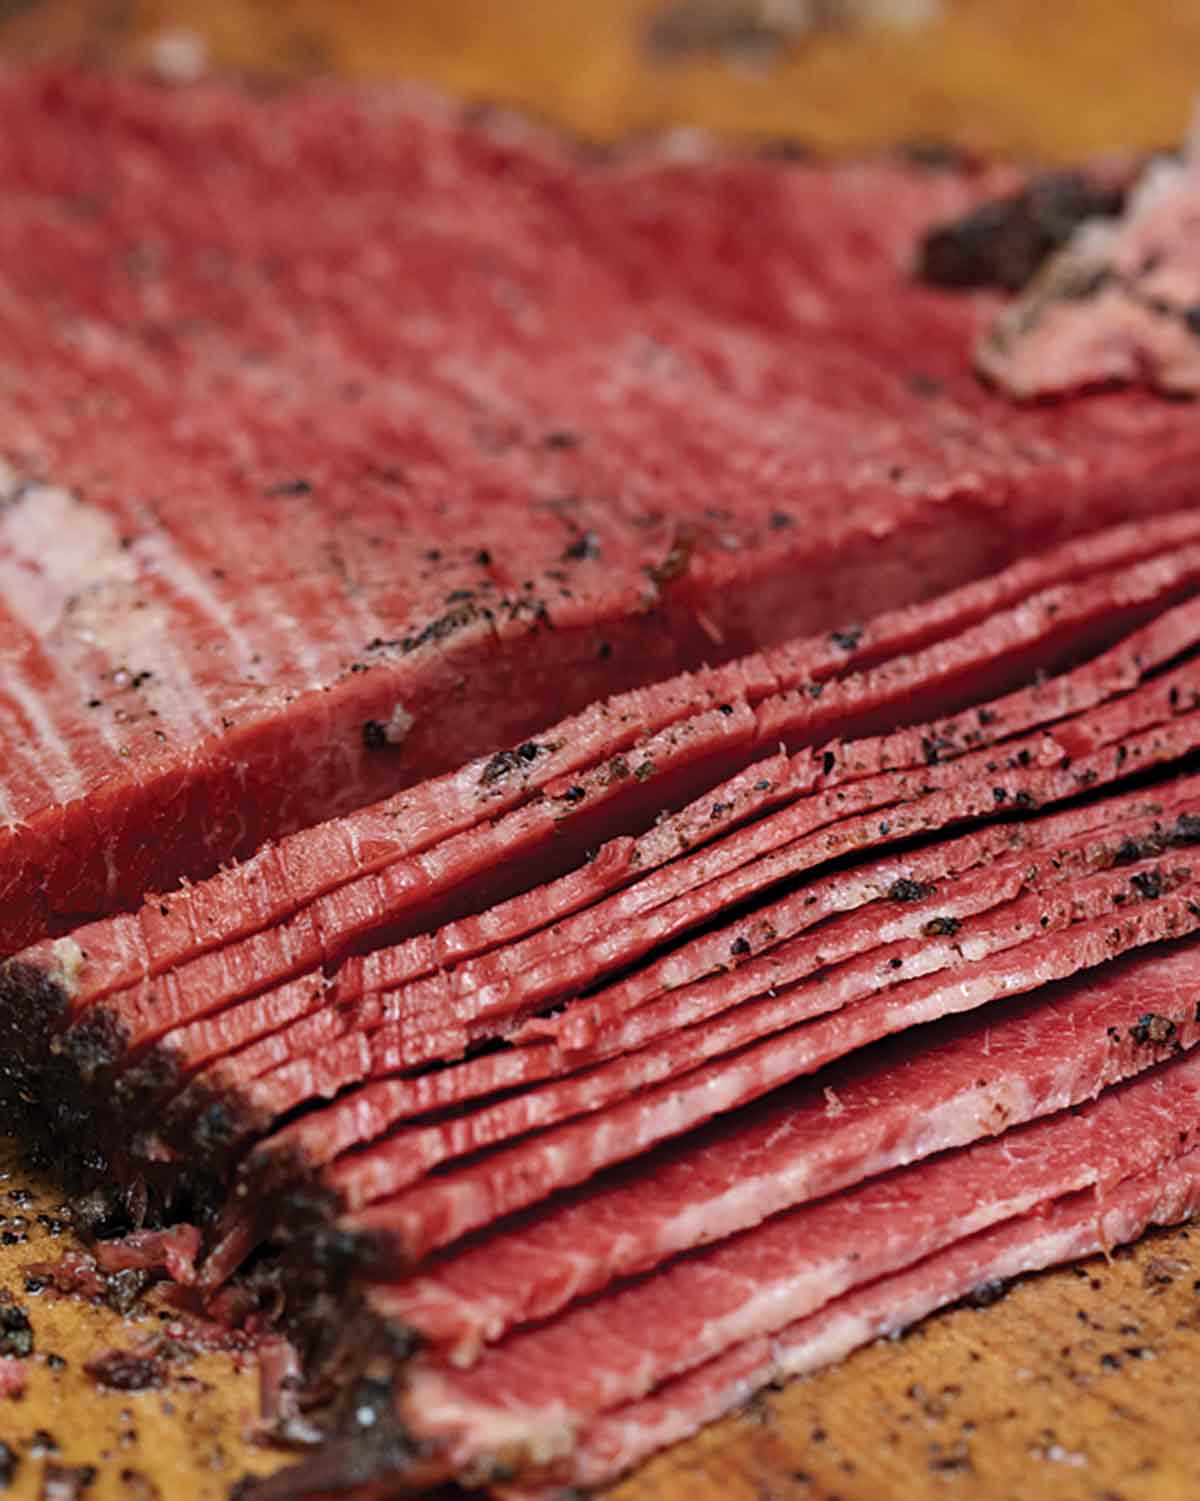 A partially sliced homemade pastrami on a wooden board.